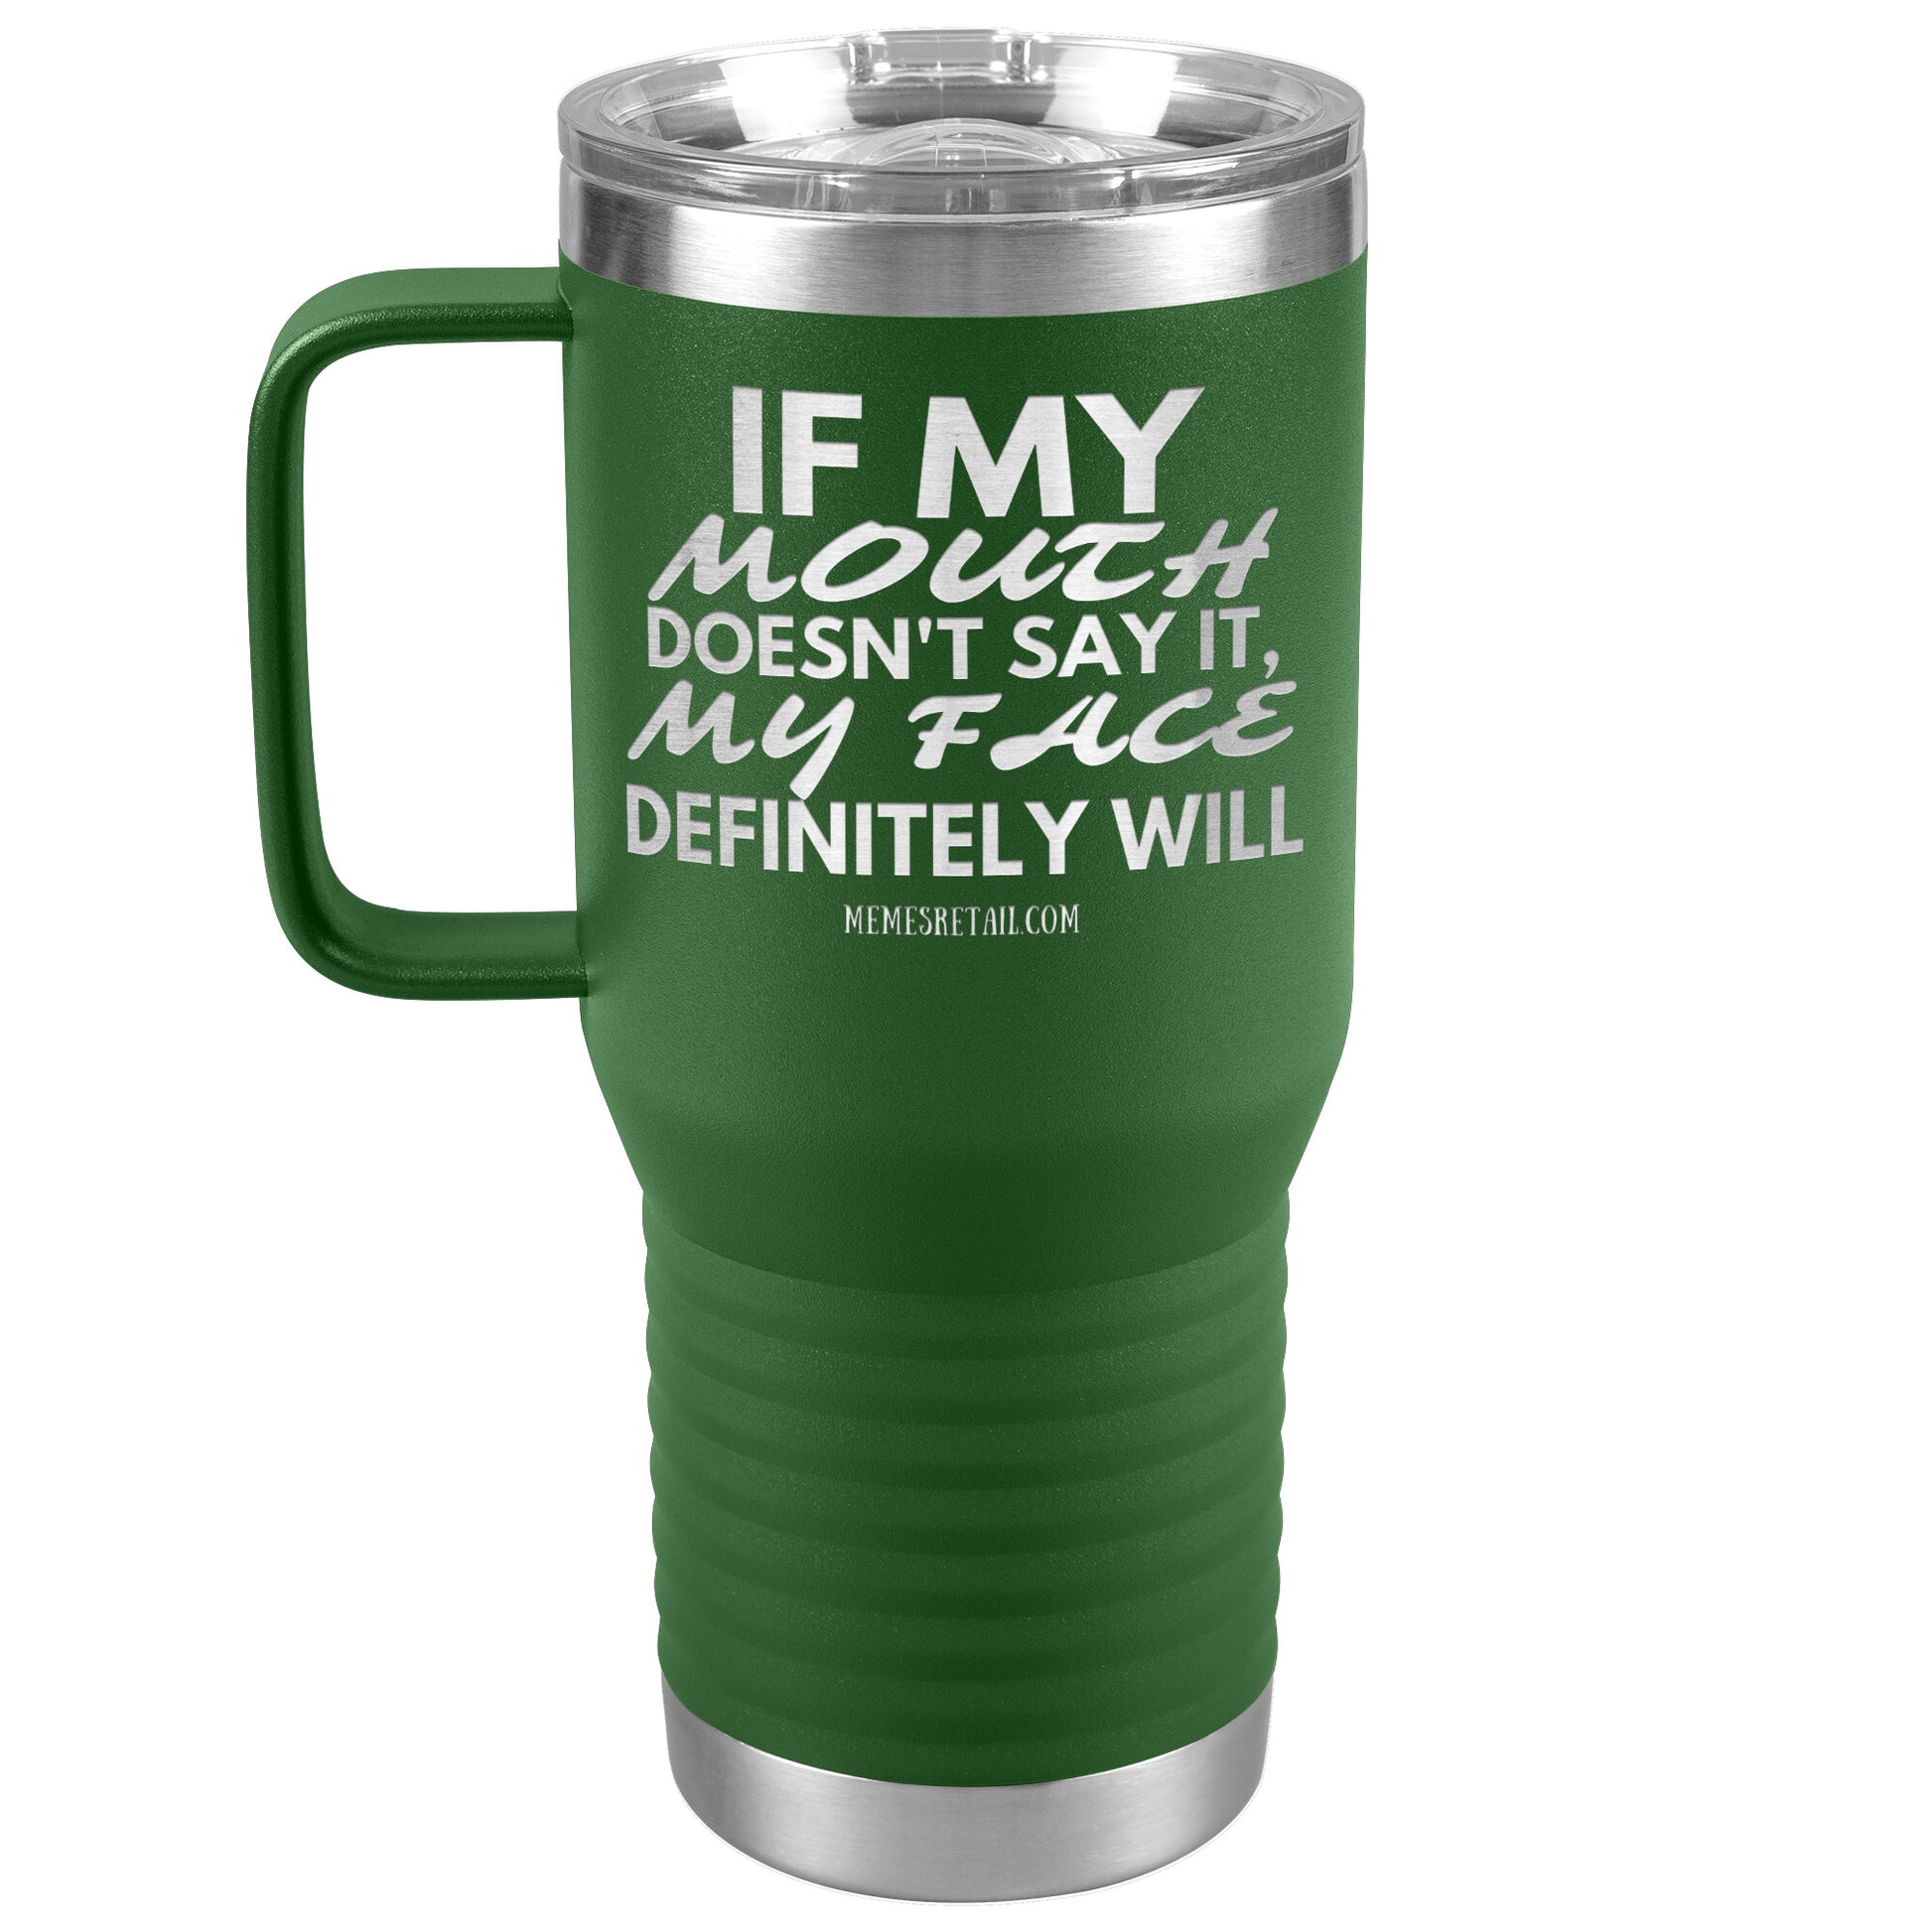 If my mouth doesn't say it, my face definitely will Tumblers, 20oz Travel Tumbler / Green - MemesRetail.com